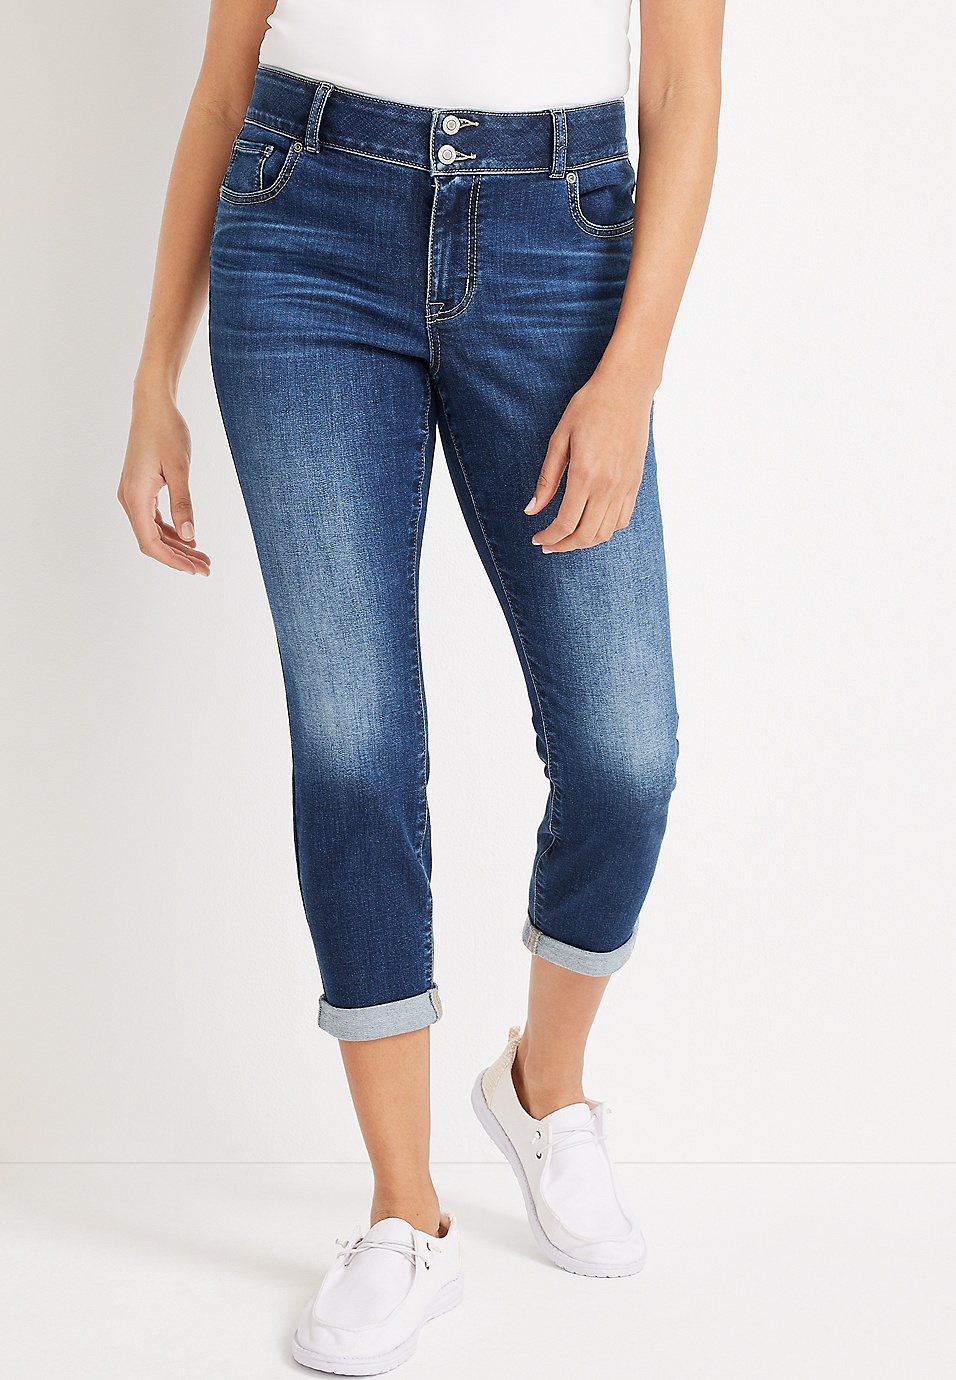 m jeans by maurices™ Cool Comfort Mid Fit Mid Rise Cropped Jean